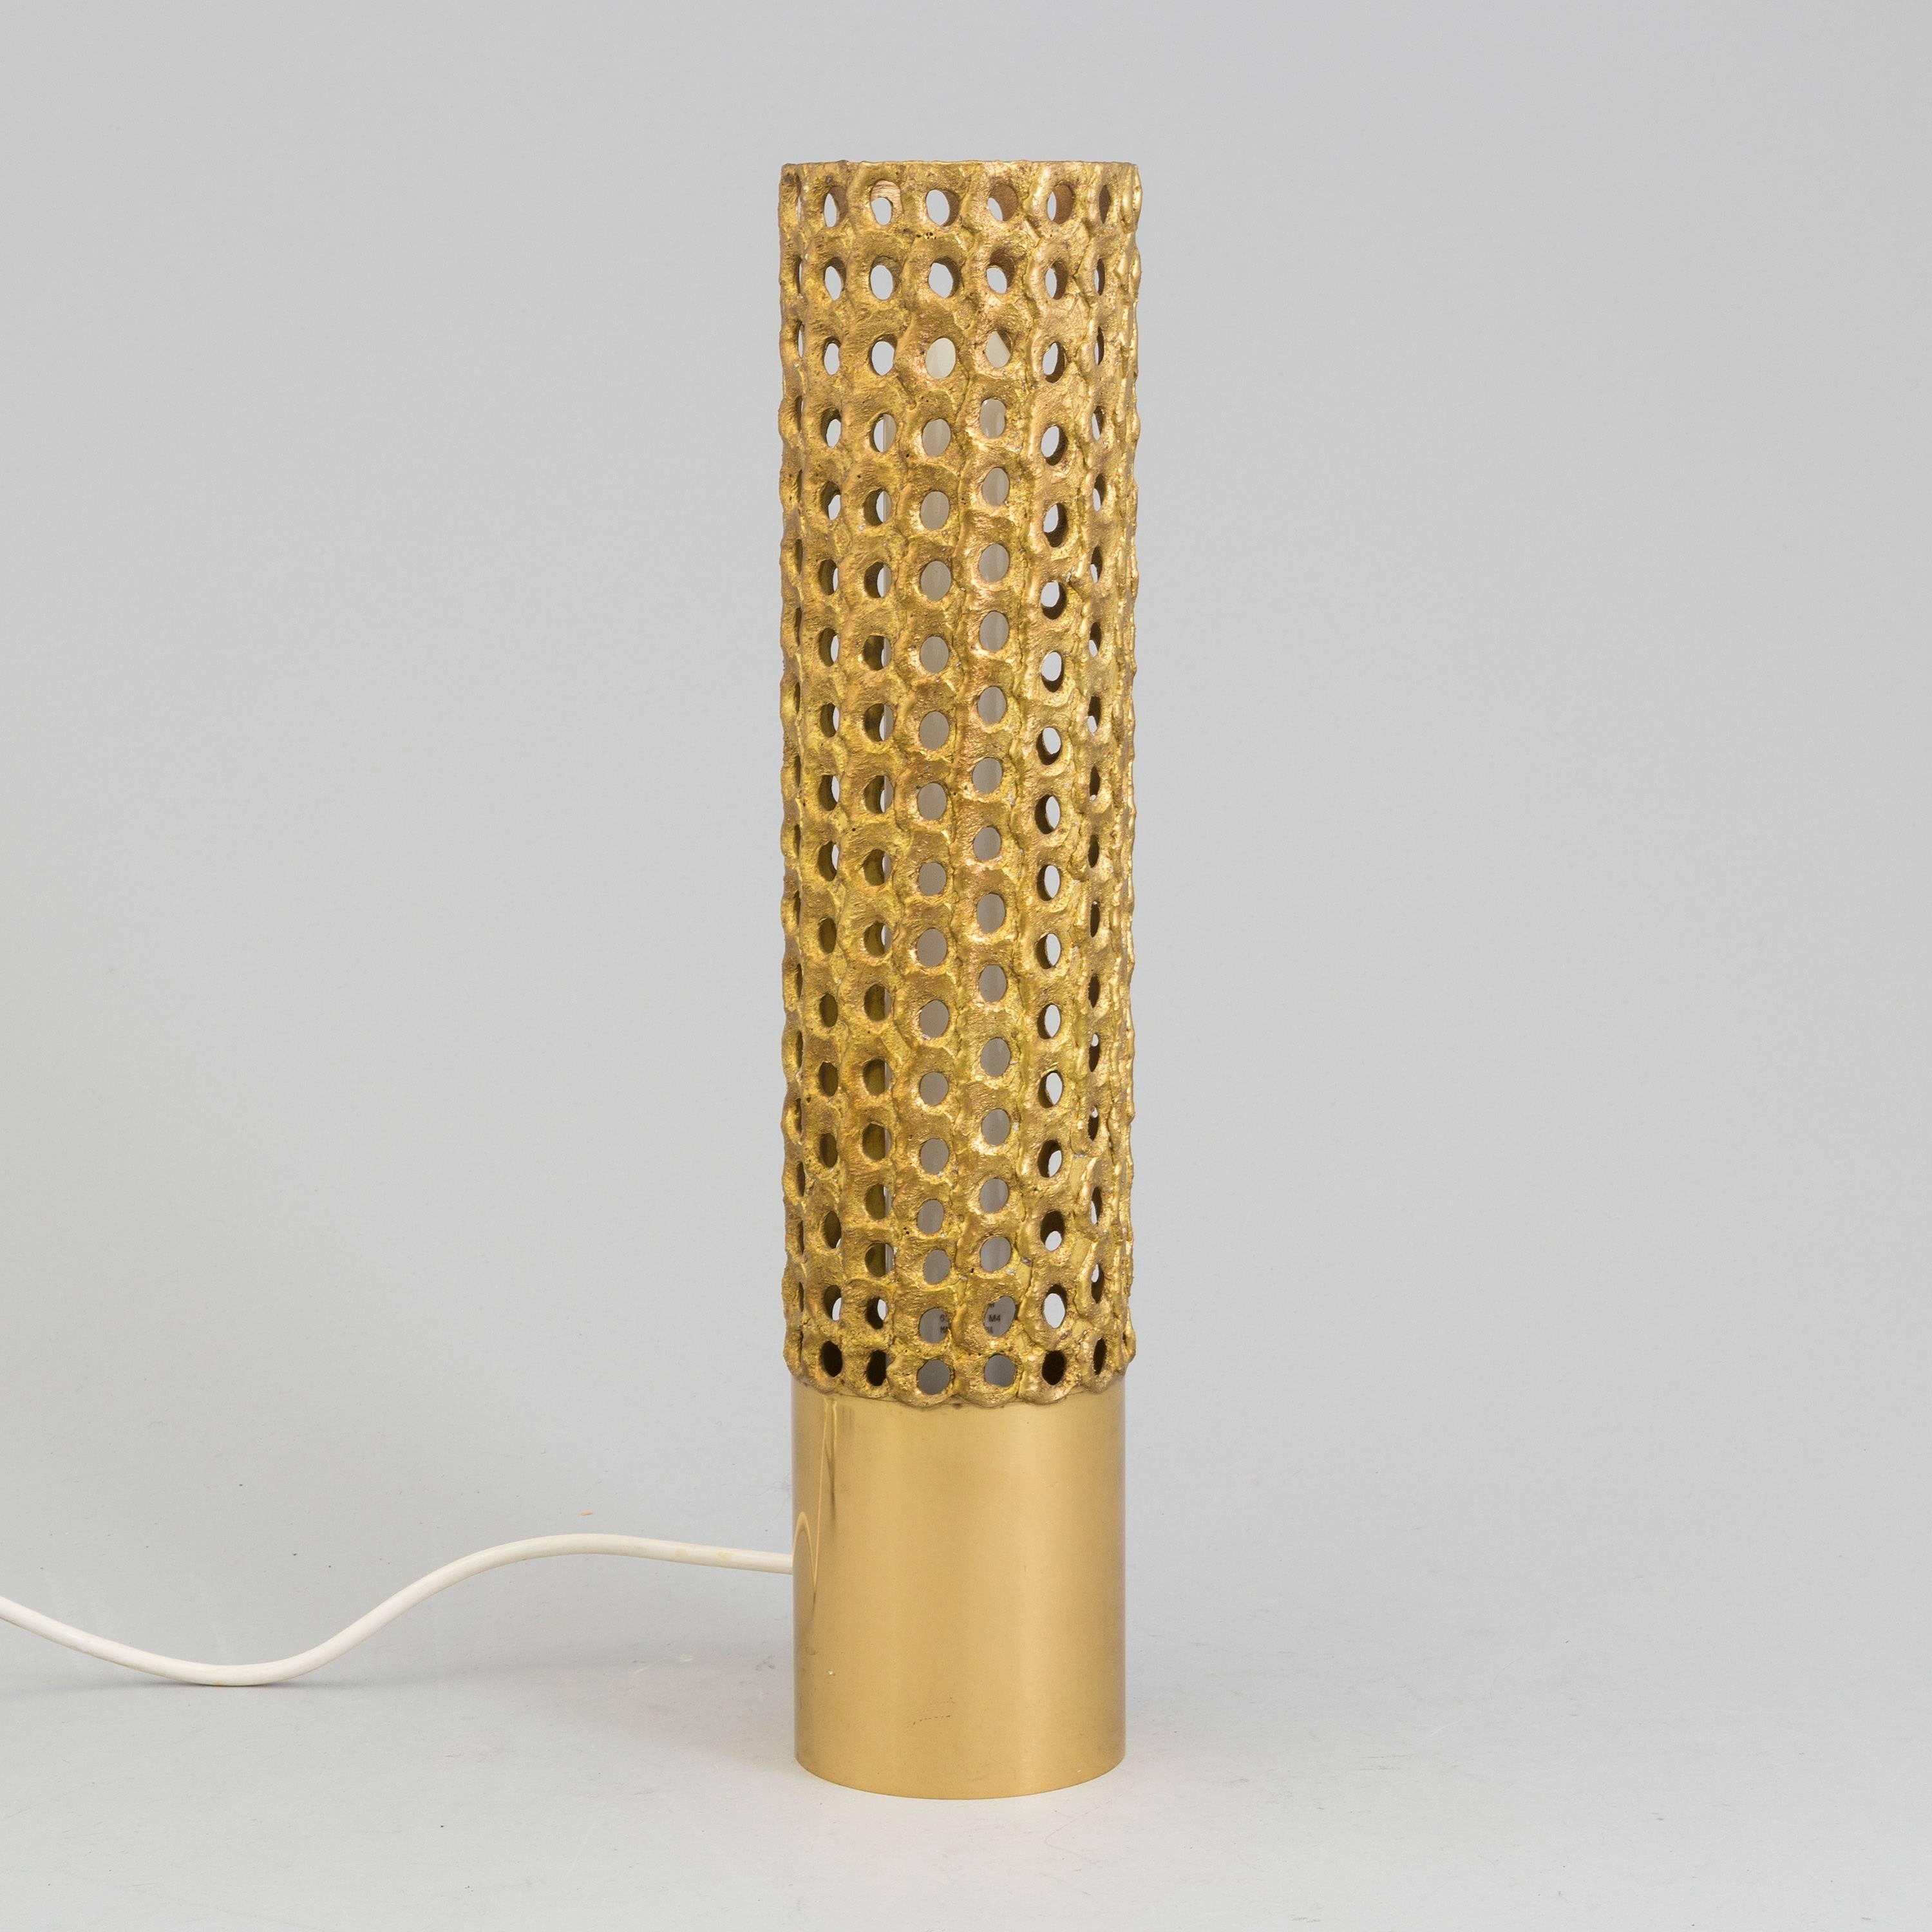 1950s Pierre Forsell brass table lamp for Skultuna. Executed in brass, this exquisitely refined sculptural table lamp is rightly celebrated as Forsell's most iconic lighting design. 

Wiring professionally updated for US electrical. Accommodates a